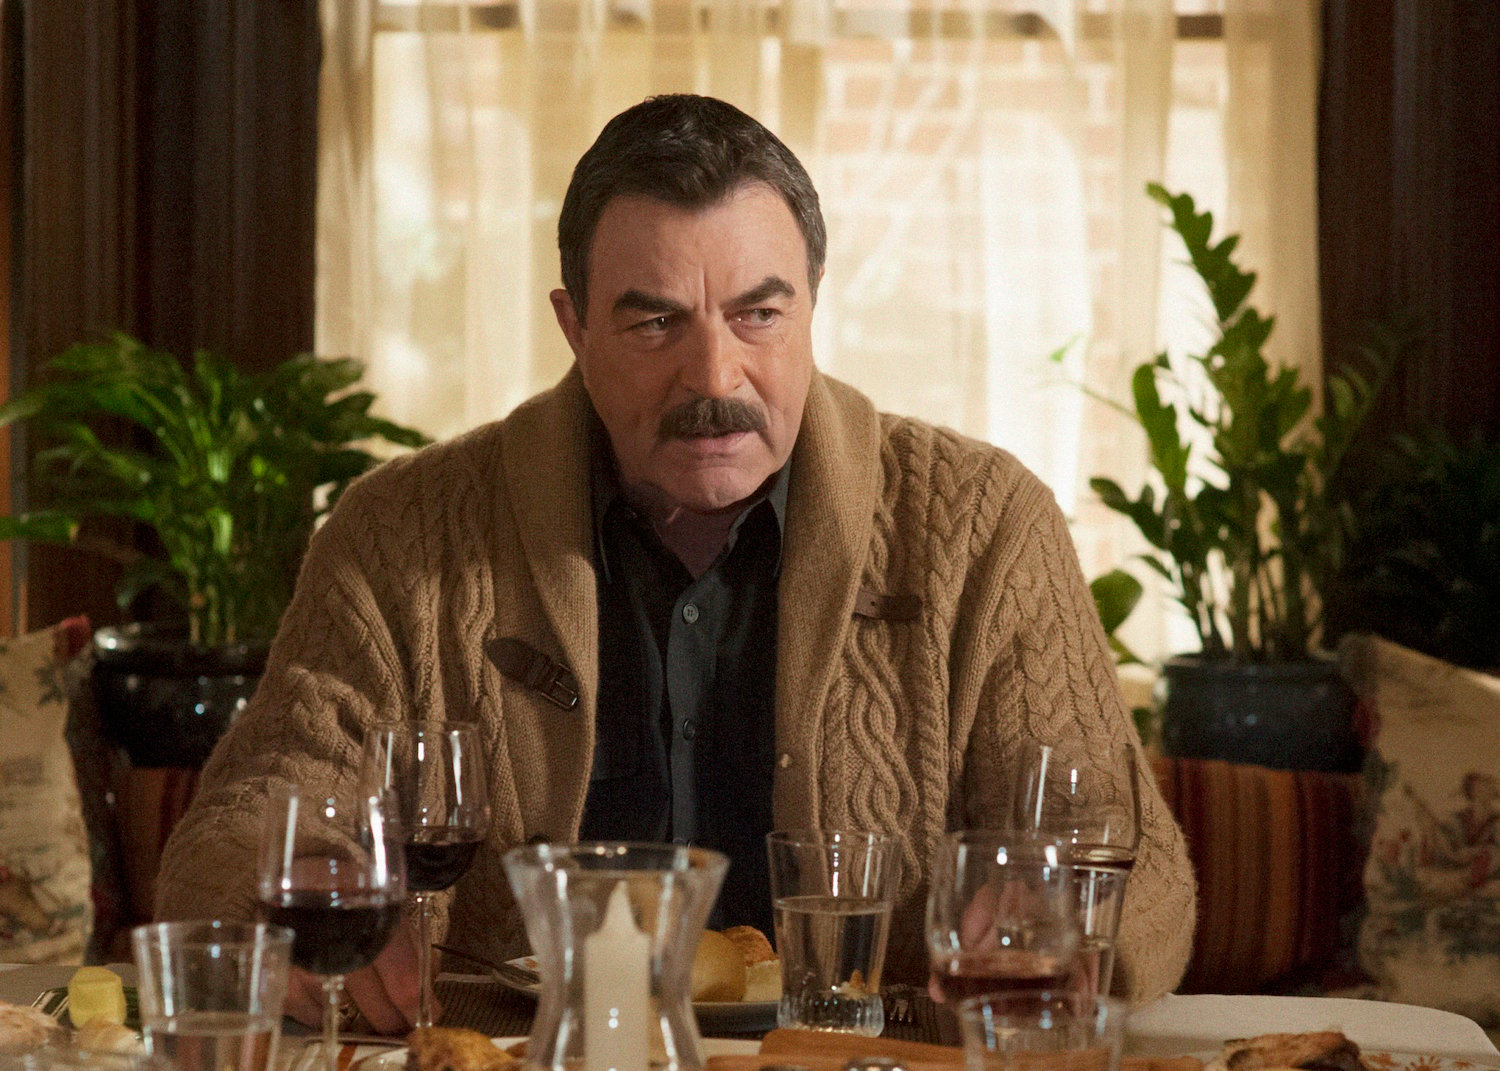 Tom Selleck as Frank Reagan looking off to the side at a dinner table